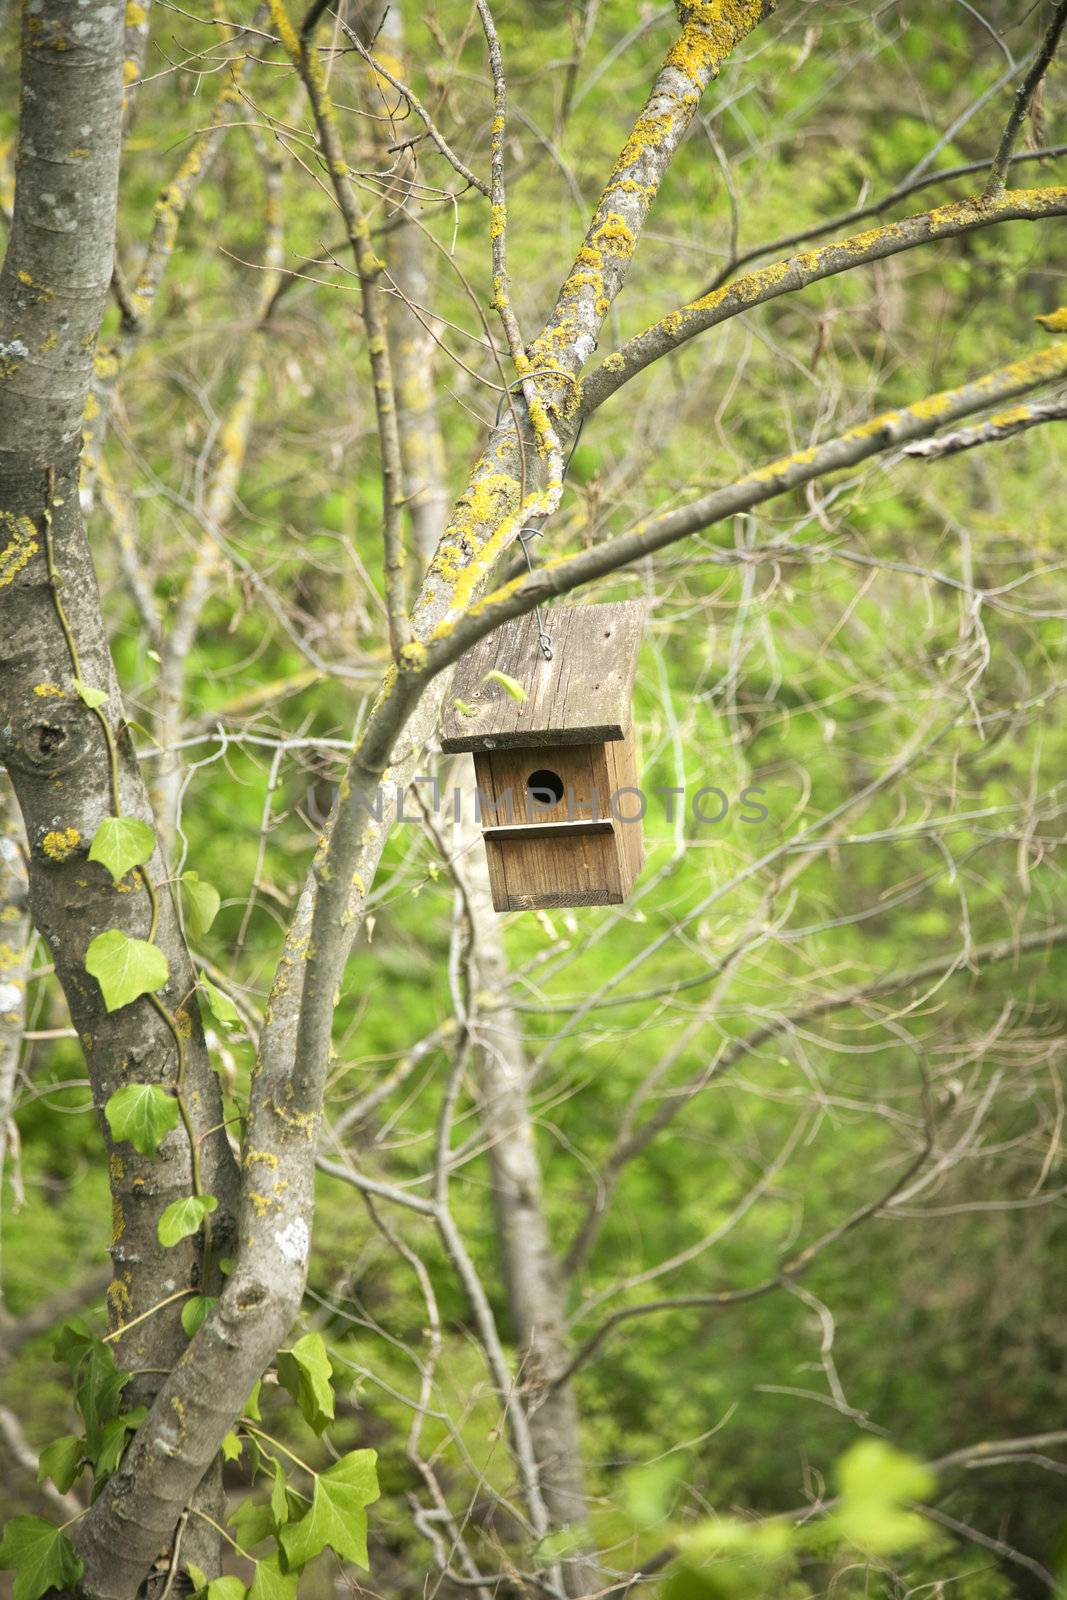 view of the front side of a little bird house pending at the forest